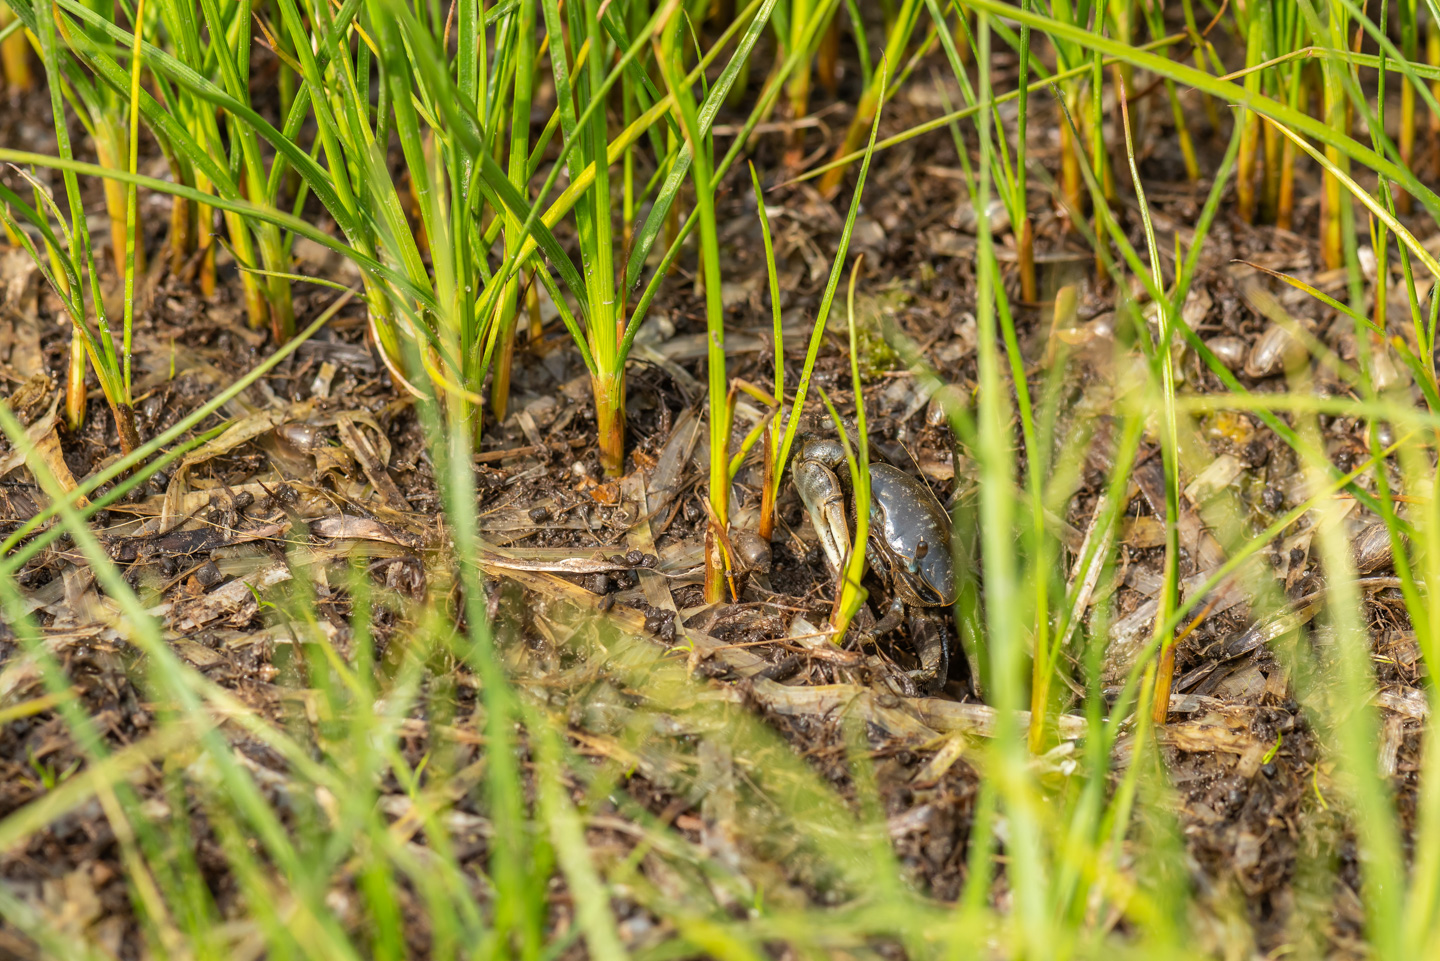 Looking through grass at a snail and a fiddler crab; the fiddler crab is partially in its hole.